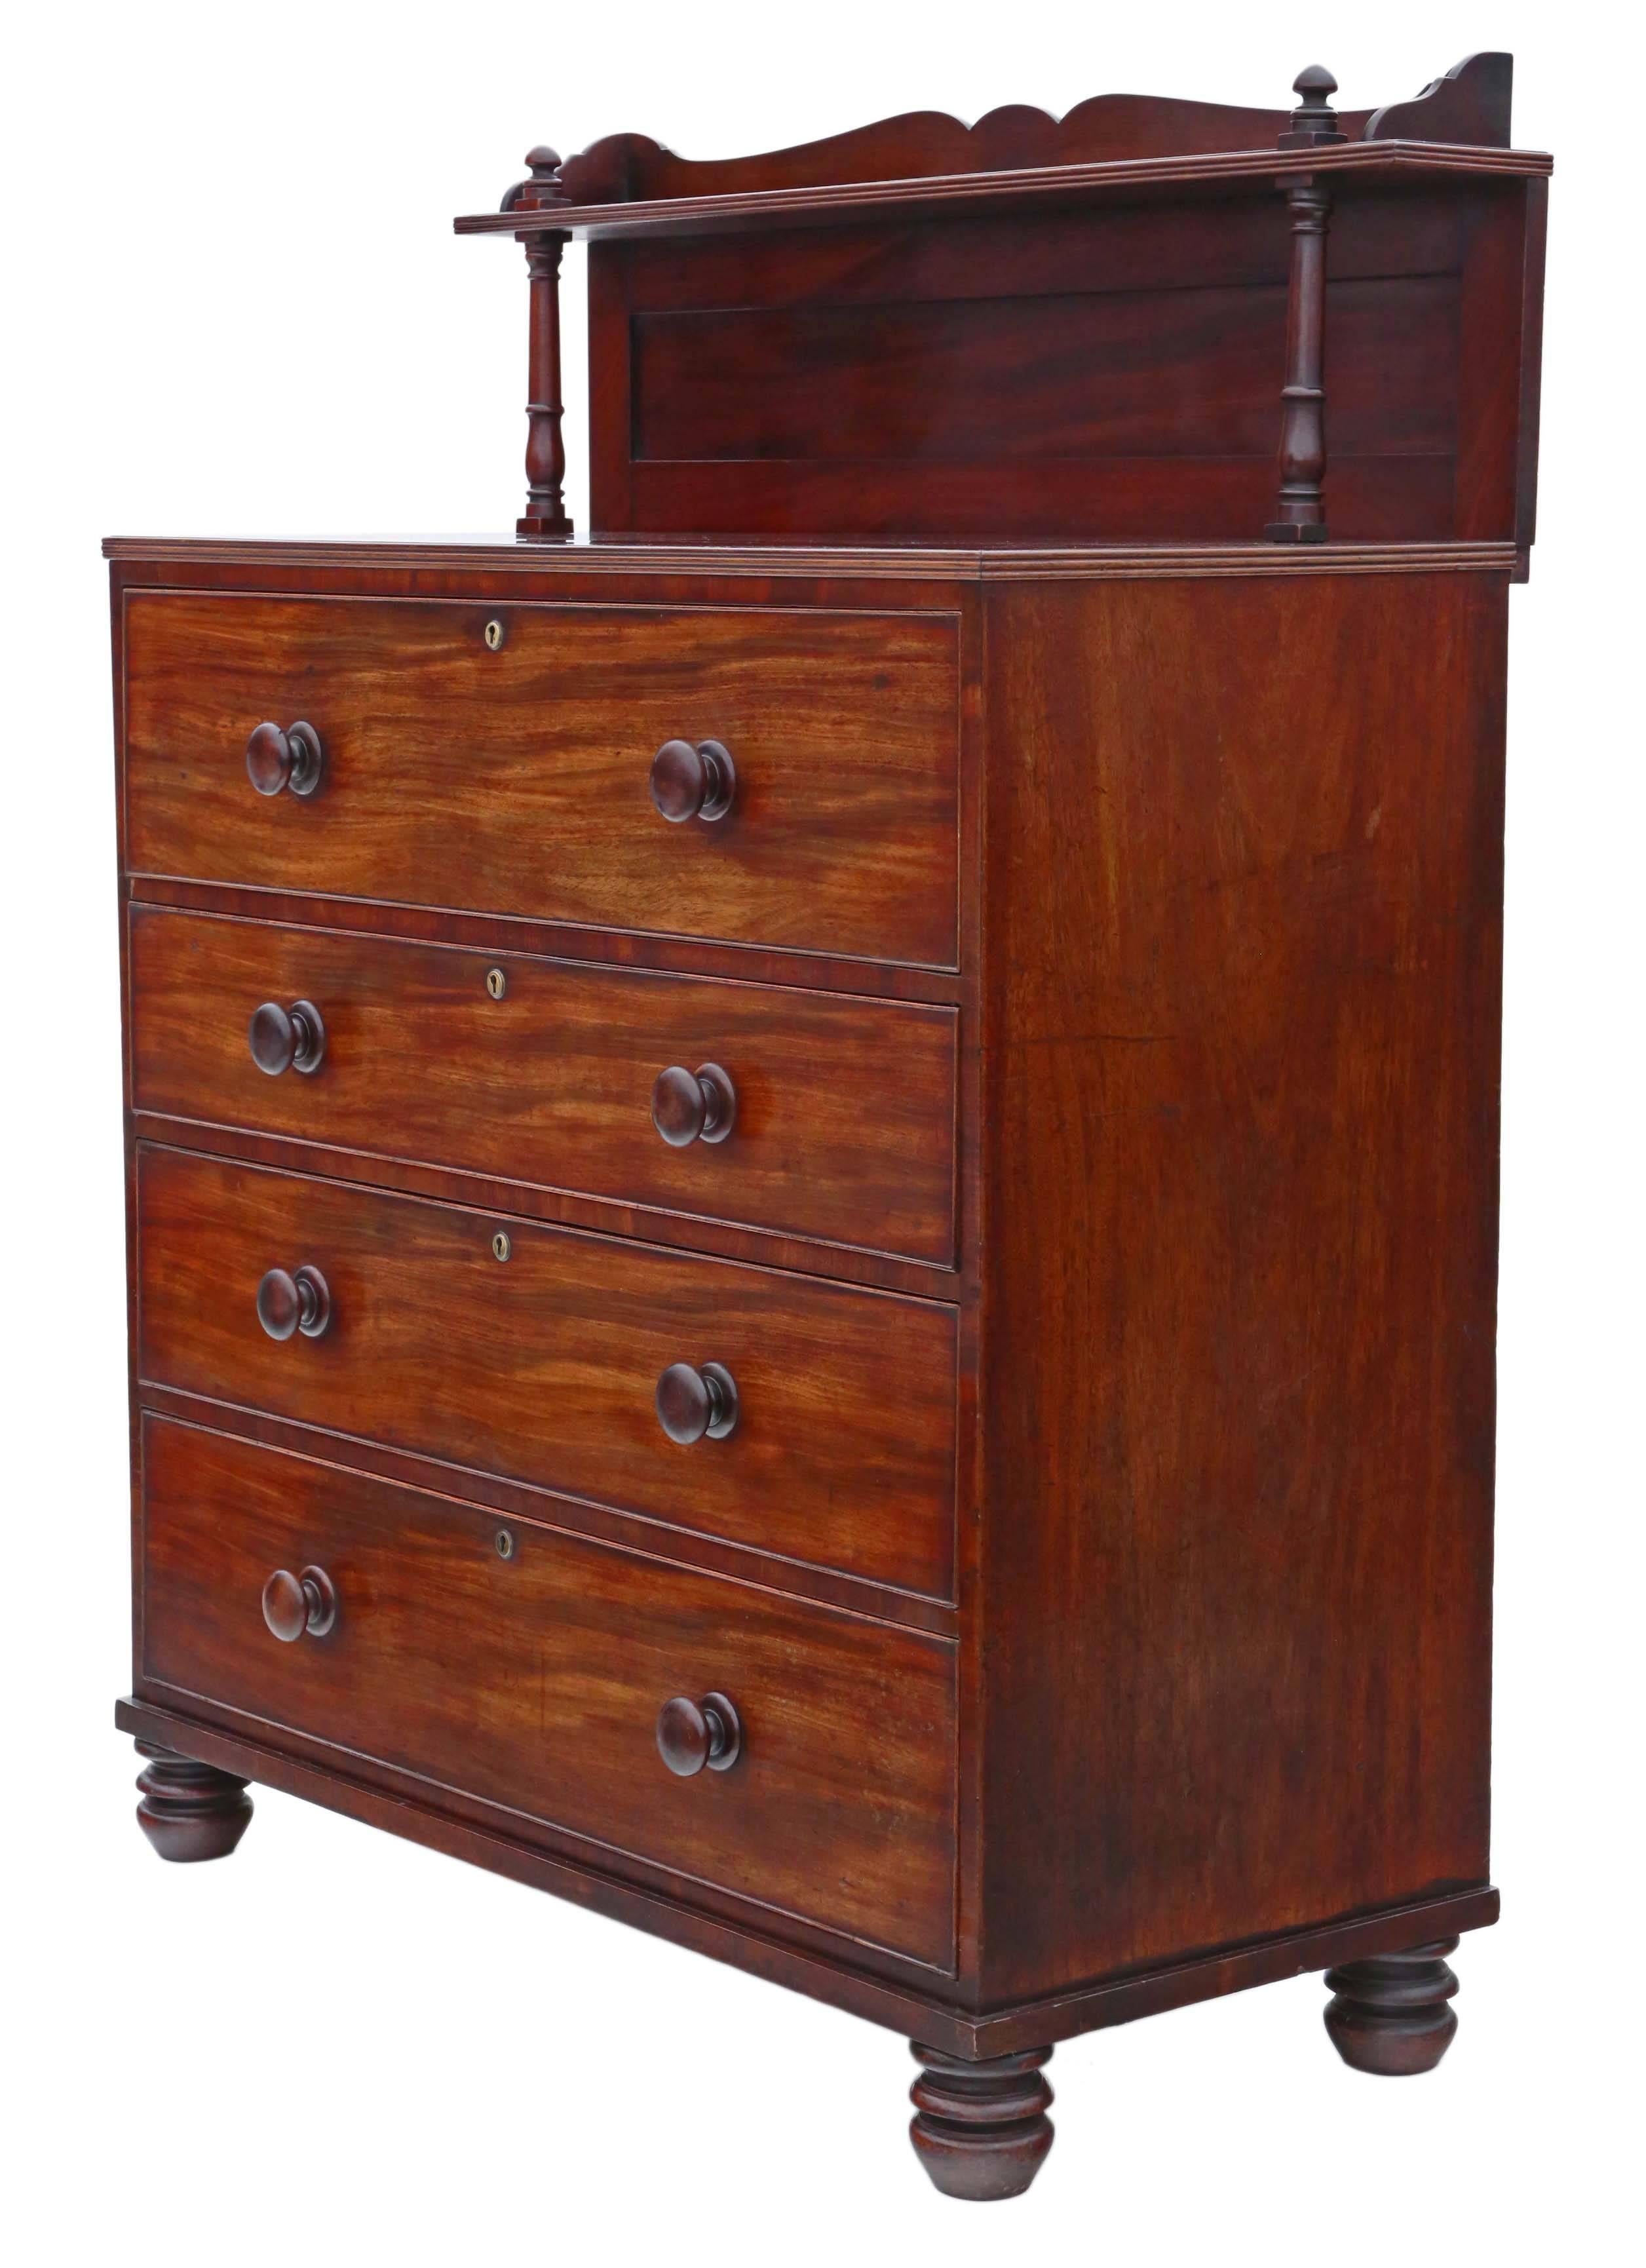 Antique Regency William IV Mahogany Secretaire Desk Writing Chest of Drawers For Sale 4